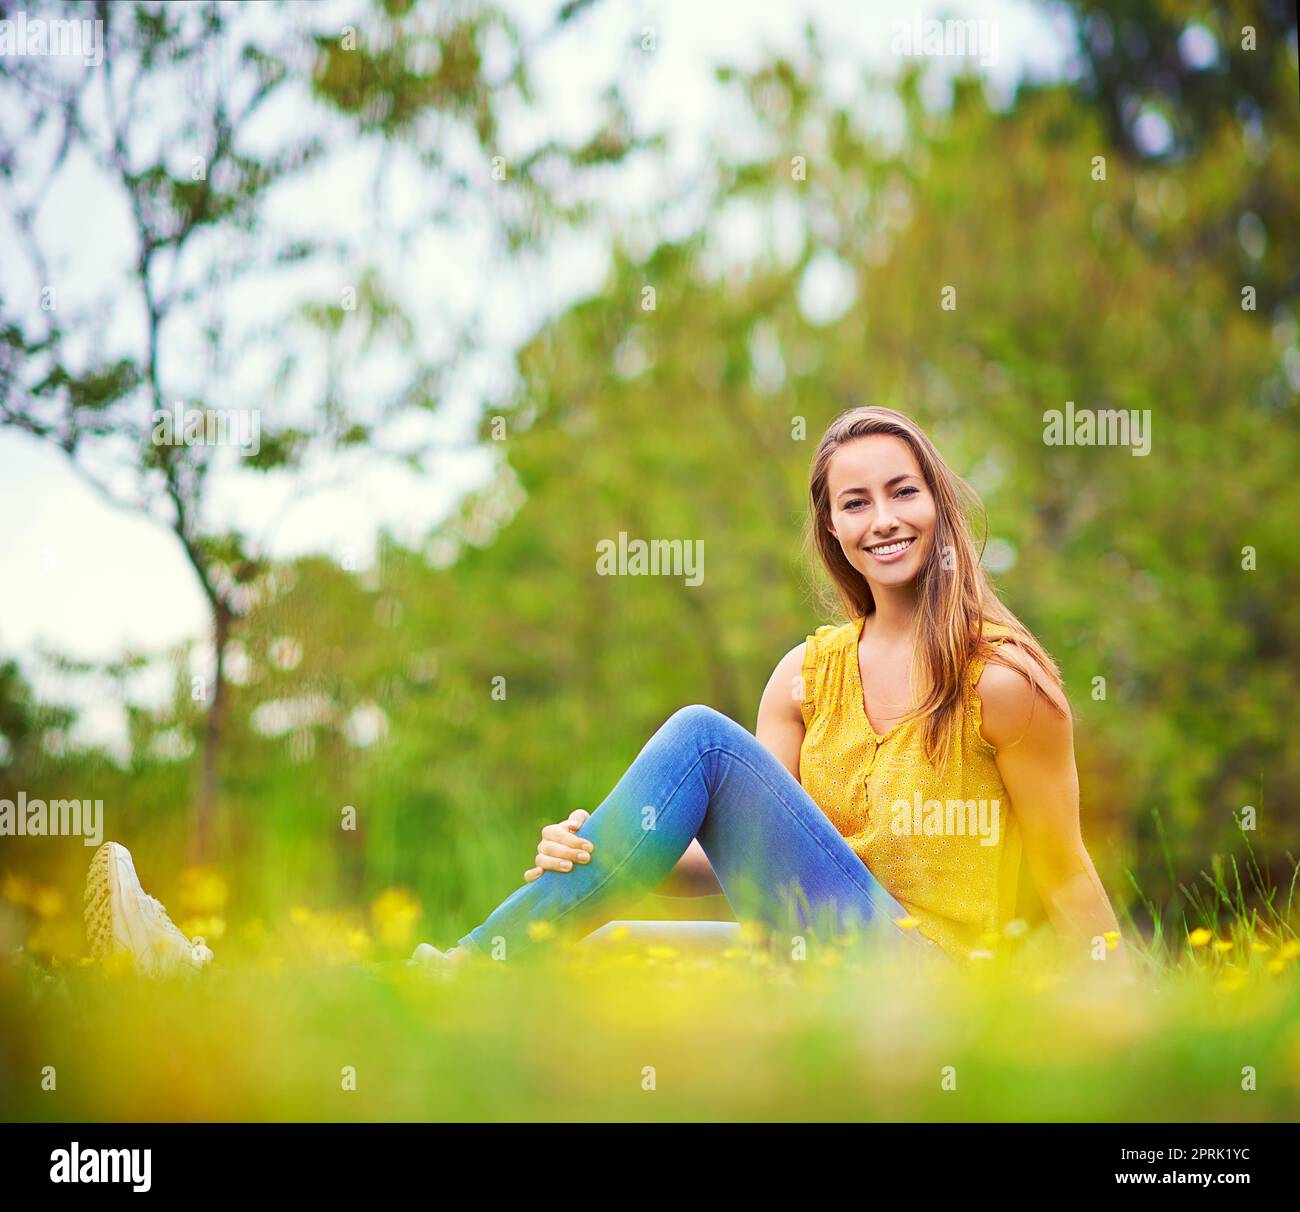 Life is good. a carefree young woman relaxing in a field of grass and flowers. Stock Photo